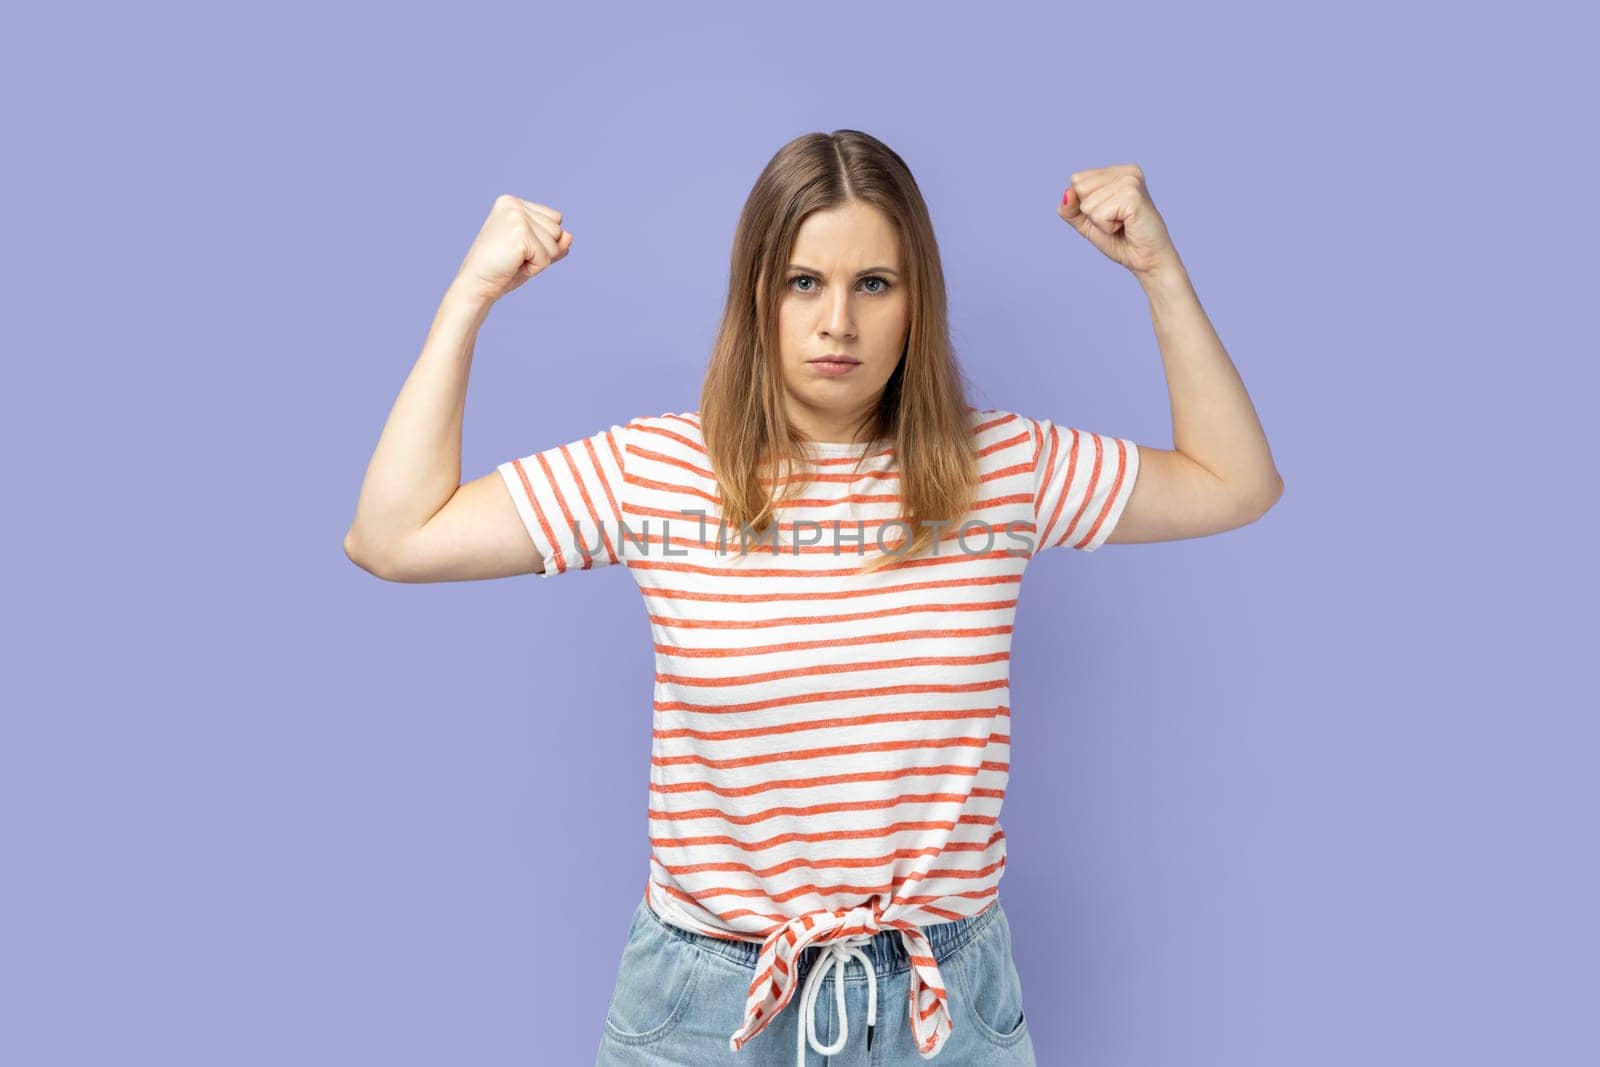 Portrait of strong confident blond woman wearing striped T-shirt standing with raised arms, showing her biceps and triceps, looking at camera. Indoor studio shot isolated on purple background.